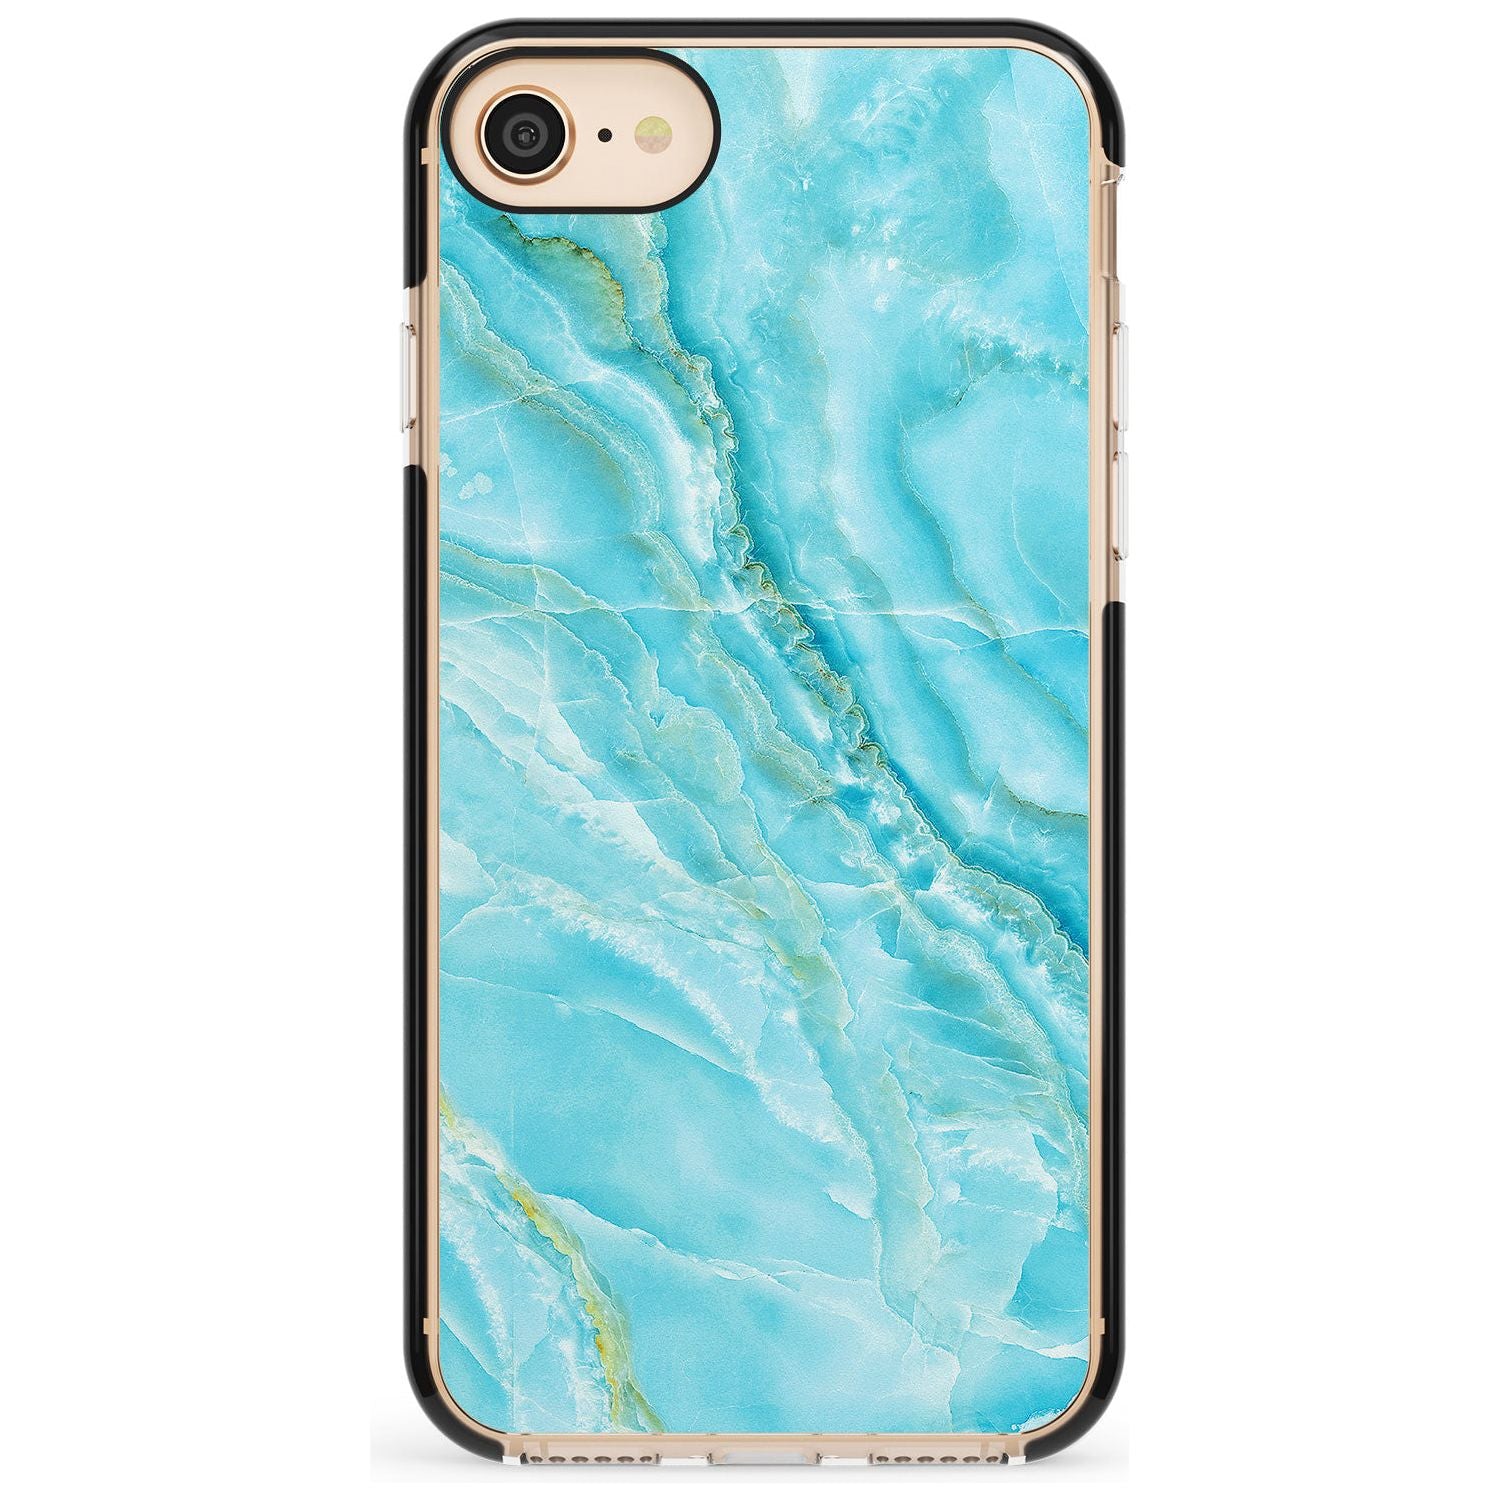 Bright Blue Onyx Marble Texture Pink Fade Impact Phone Case for iPhone SE 8 7 Plus